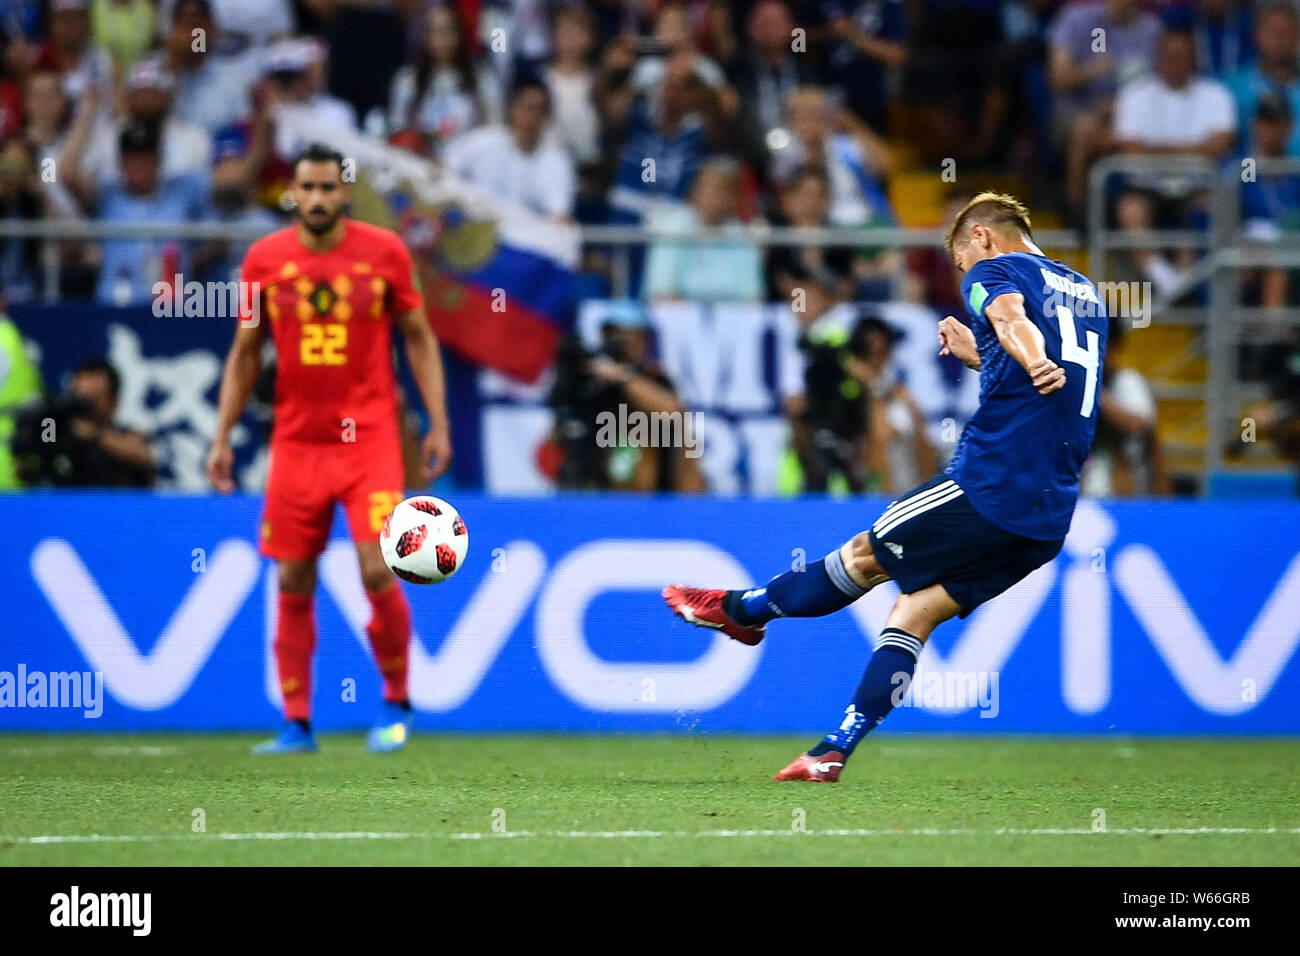 Keisuke Honda of Japan shoots against Belgium in their Round of 16 match during the 2018 FIFA World Cup in Rostov, Russia, 2 July 2018.   Belgium thre Stock Photo